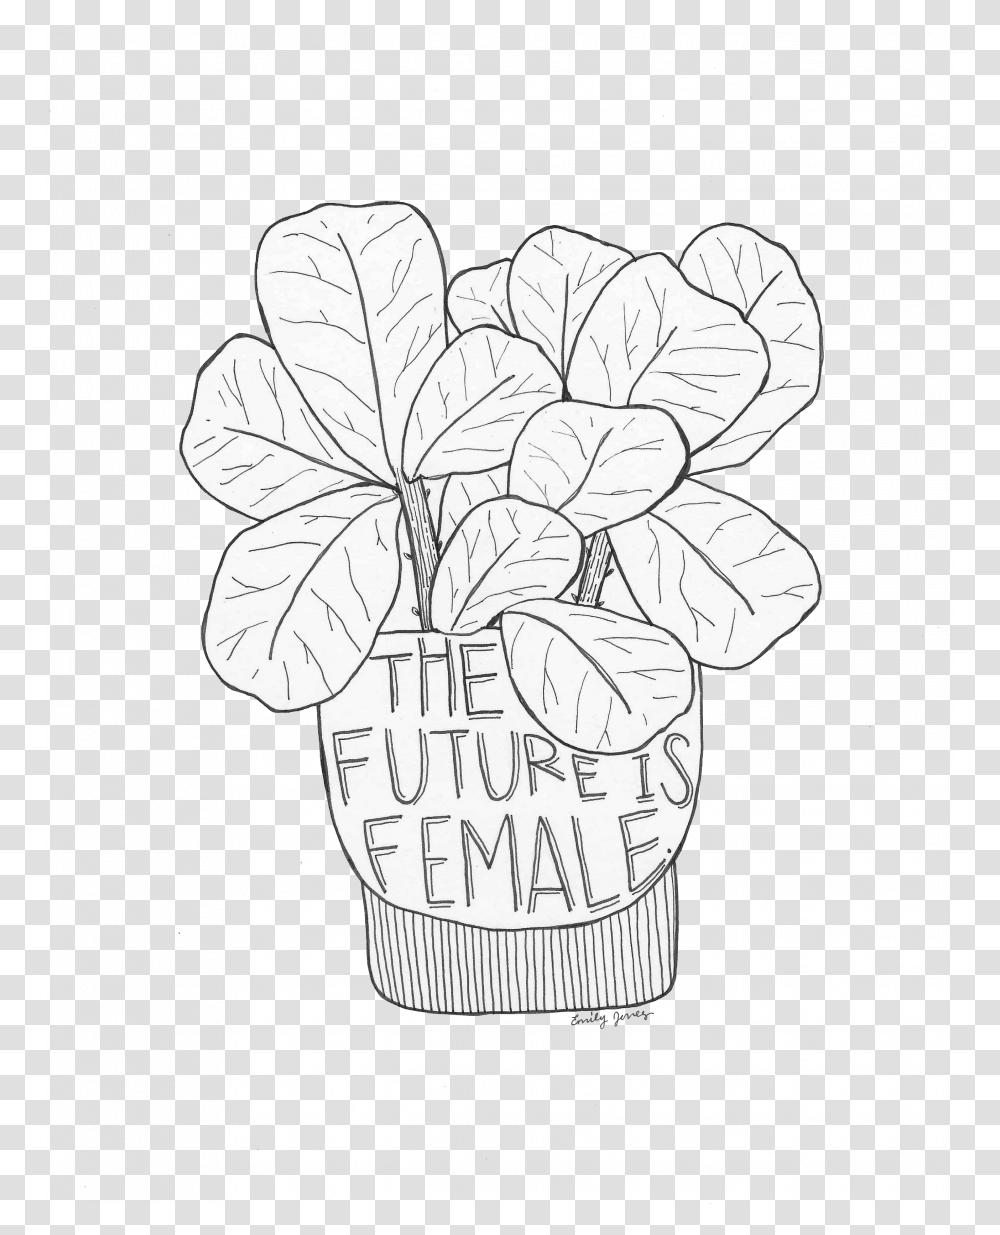 Drawing Future City 3d Wolf Tattoo Free Books Drawing, Sketch, Plant, Flower Transparent Png